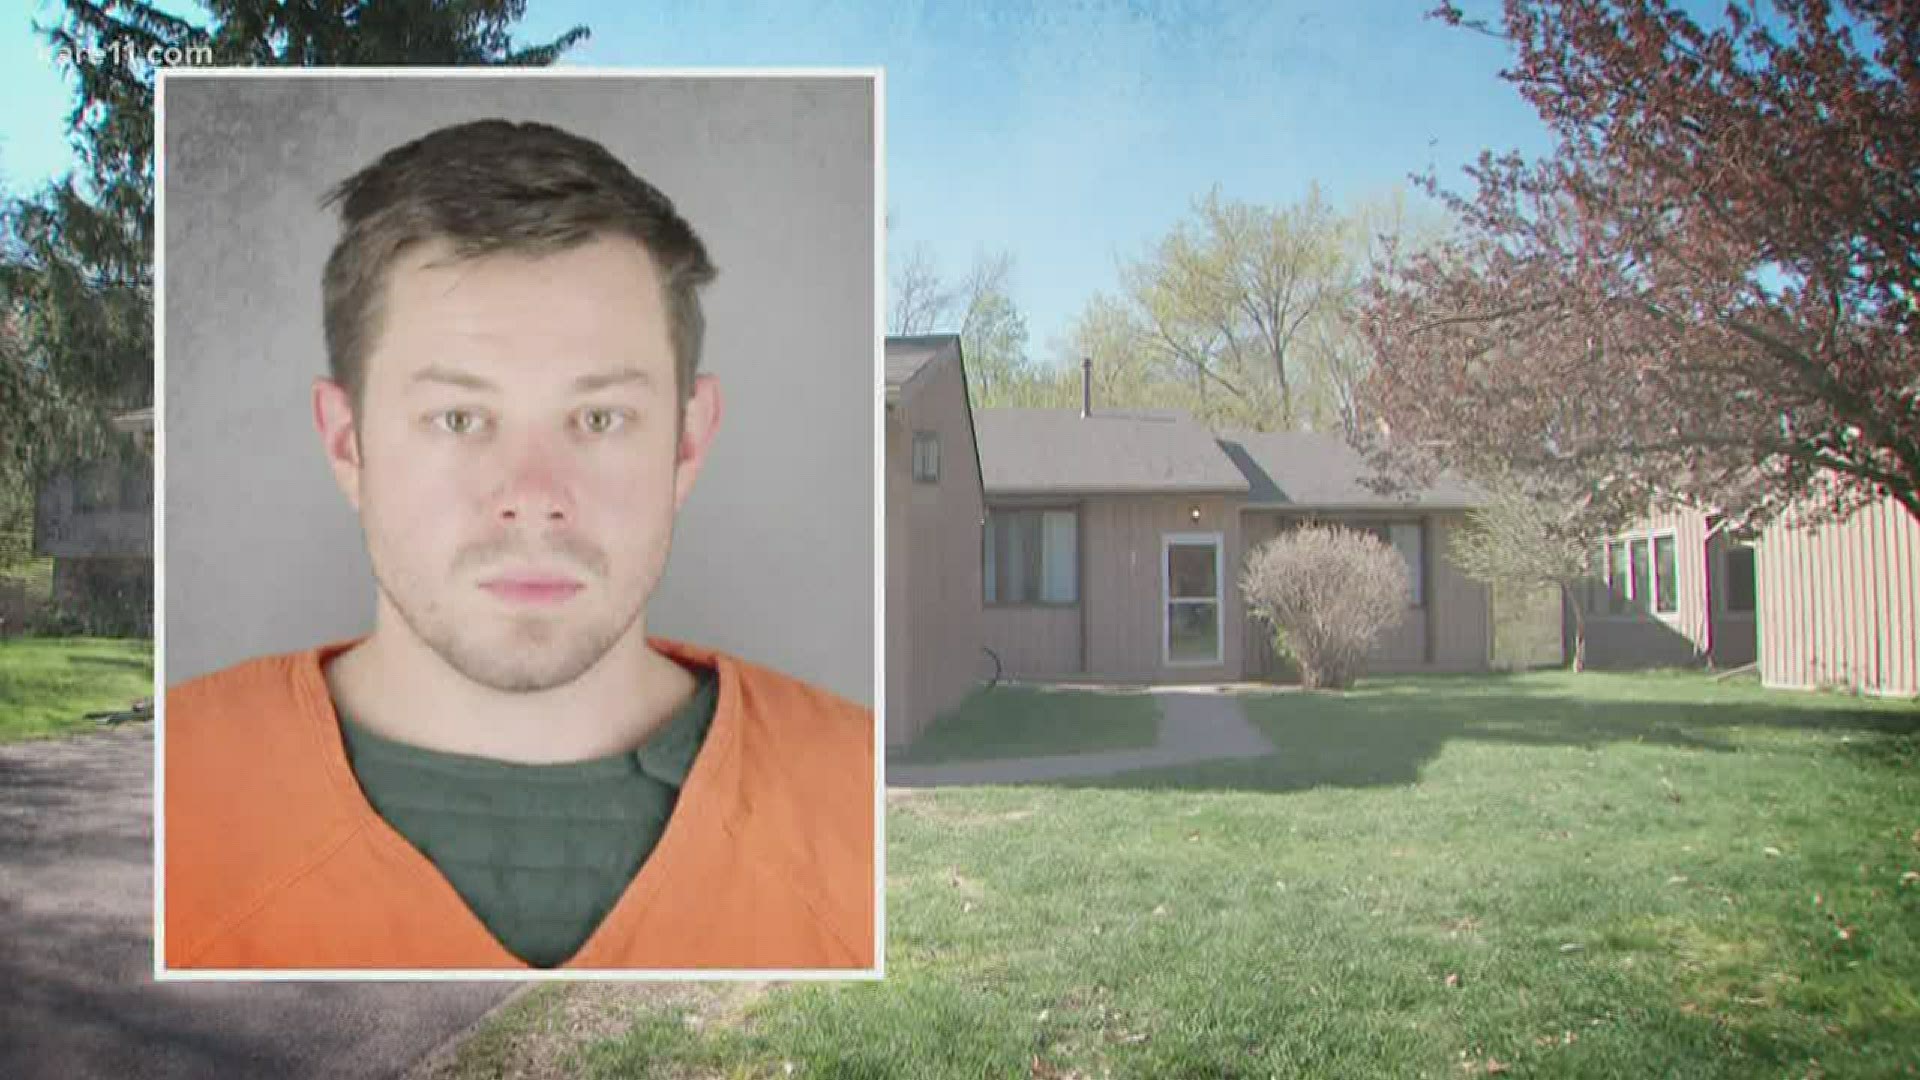 Prosecutors say 28-year-old Joshua Fury strangled his wife Maria Fury during an argument April 30, then buried her body in a crawl space beneath their home.